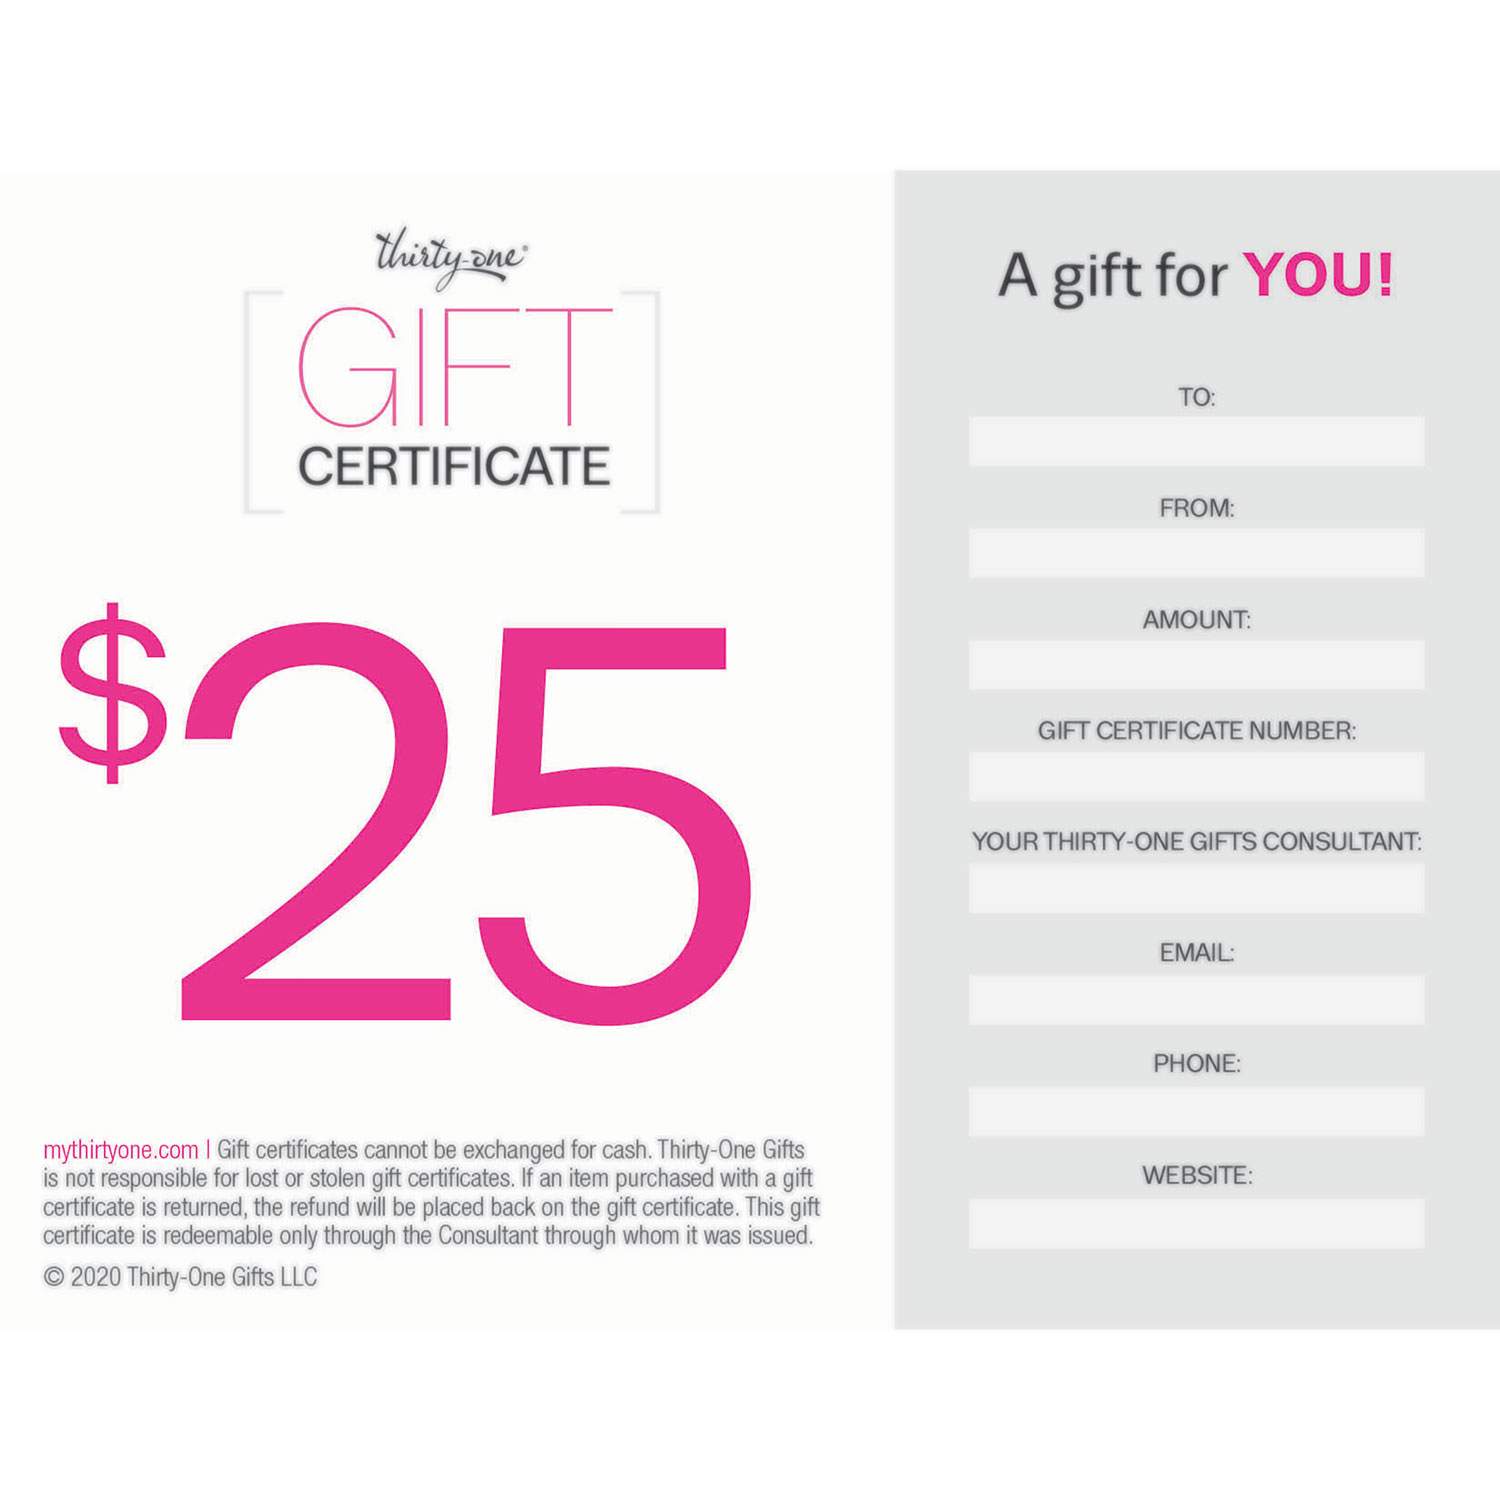 25 Dollar Shop Gift Certificate Digital Gift Card Includes